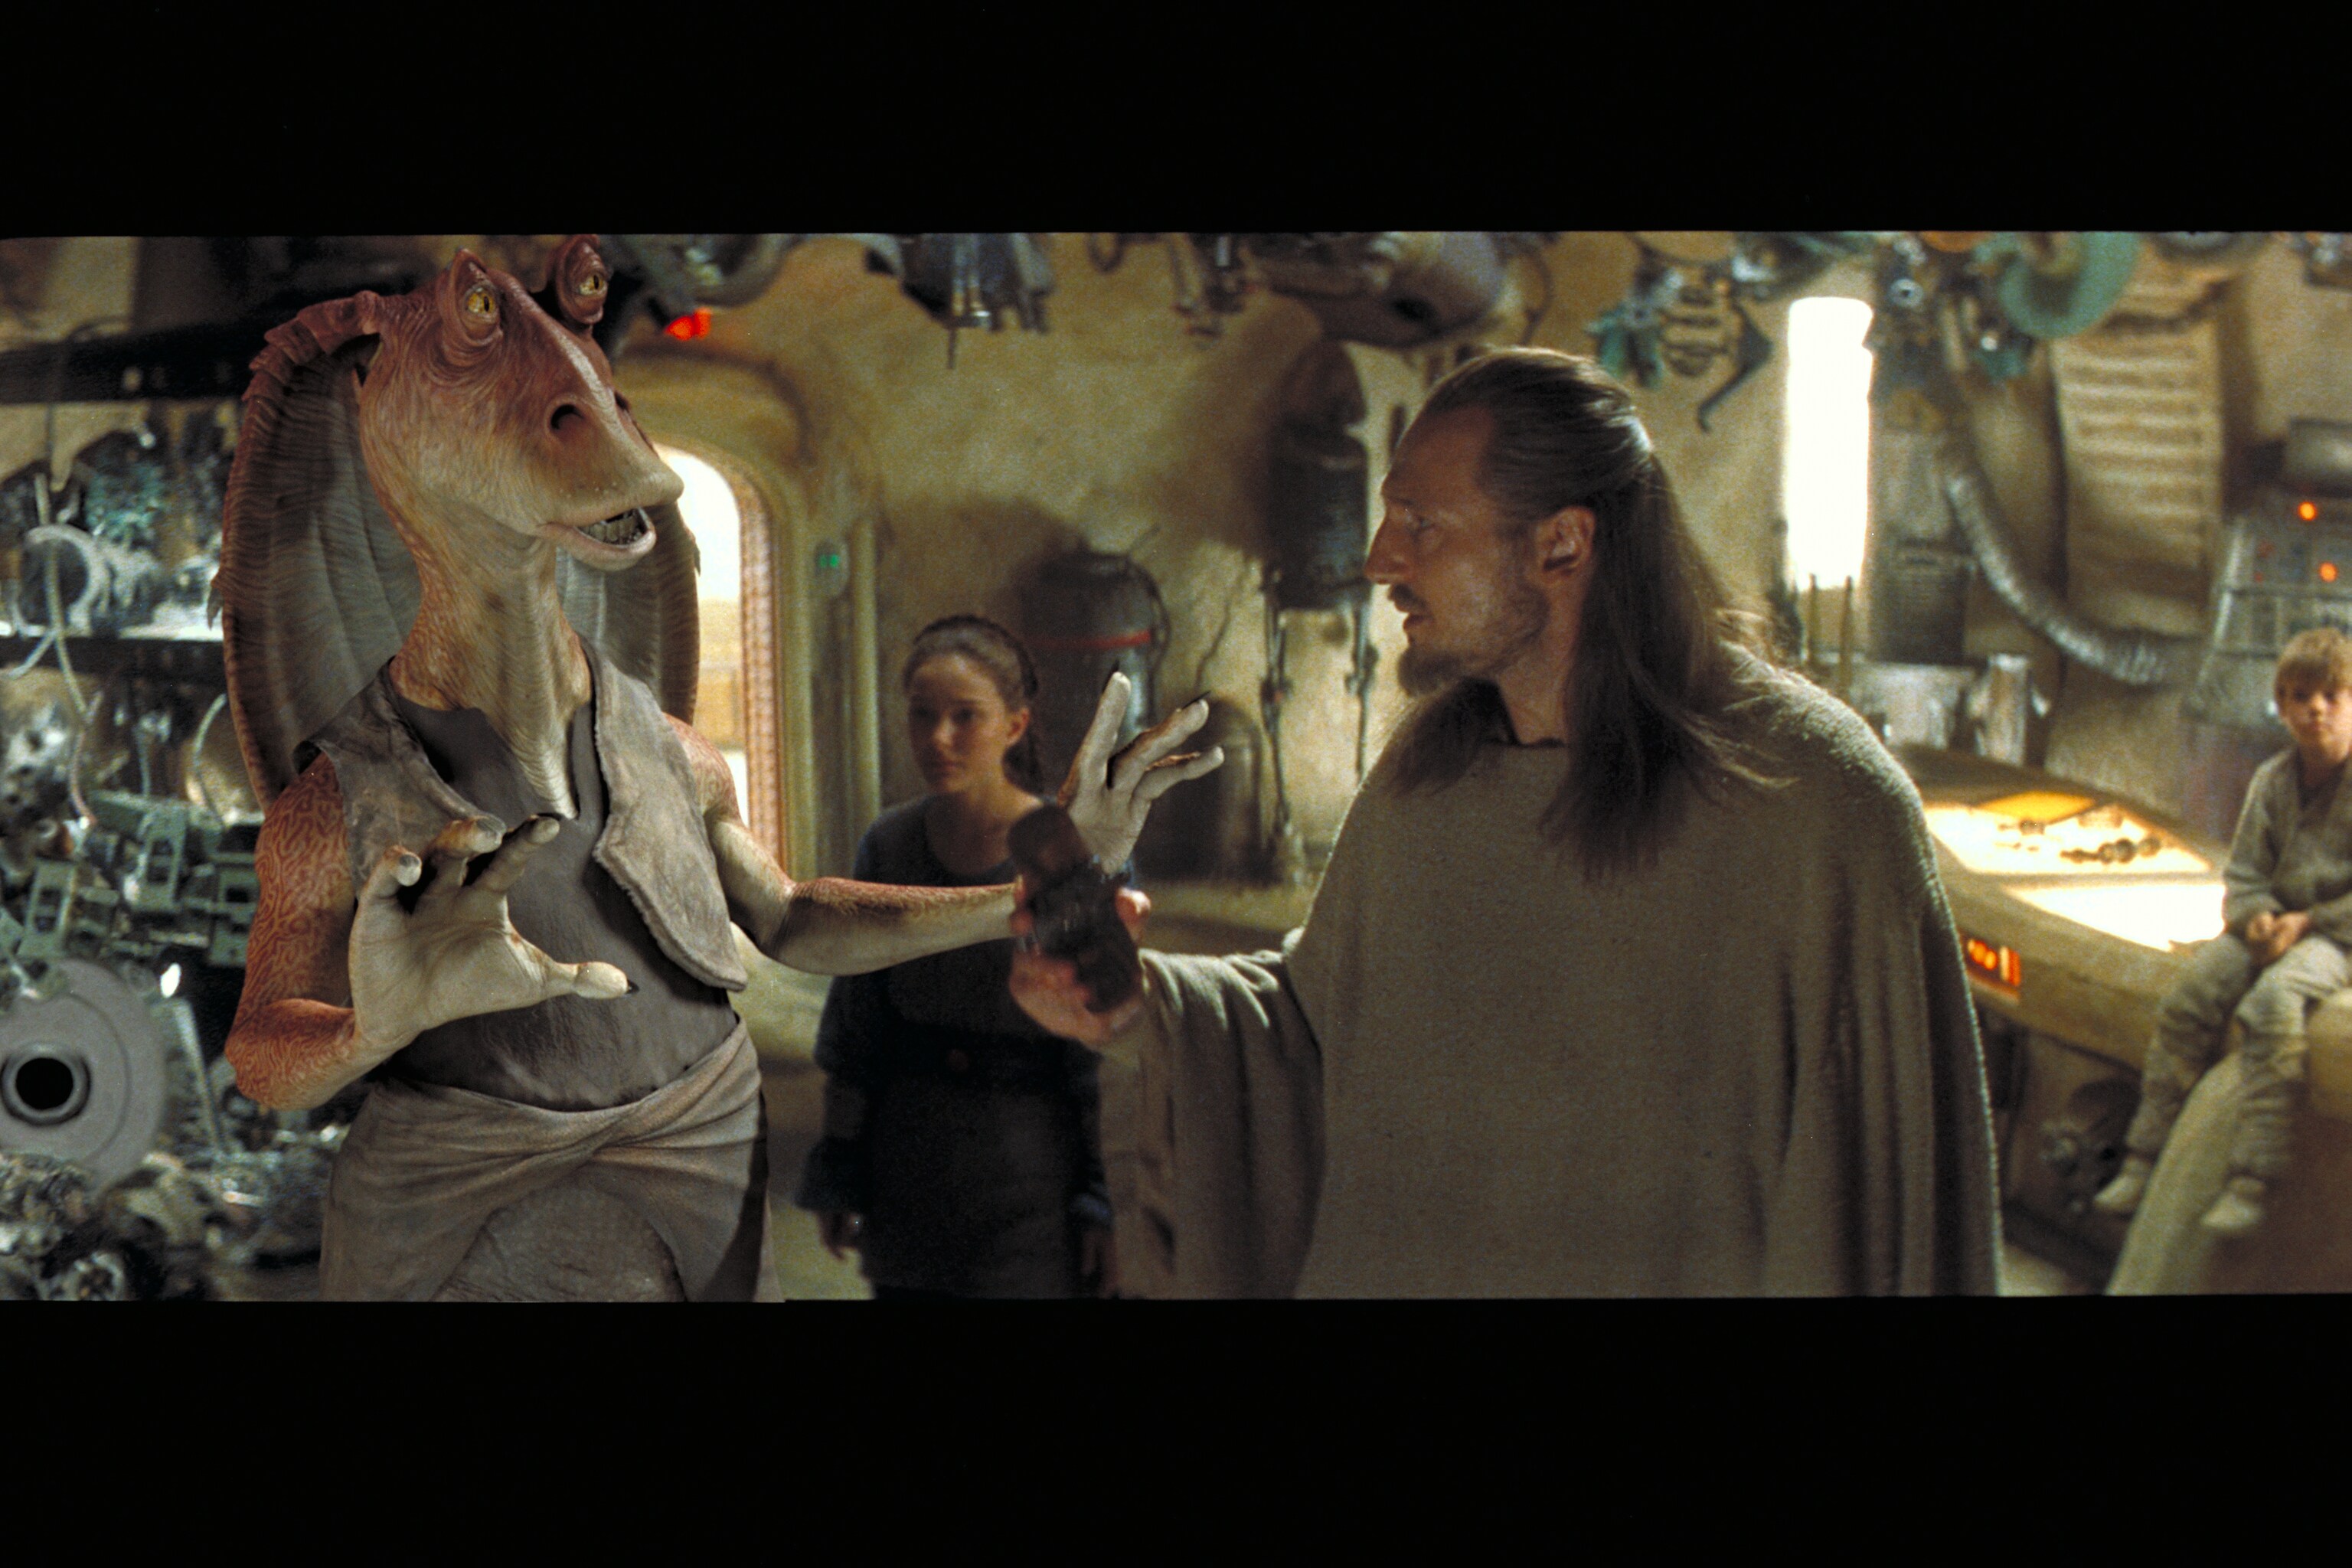 Mace advising Jar Jar not to touch anything aboard the shuttle echoes Qui-Gon's same instructions...